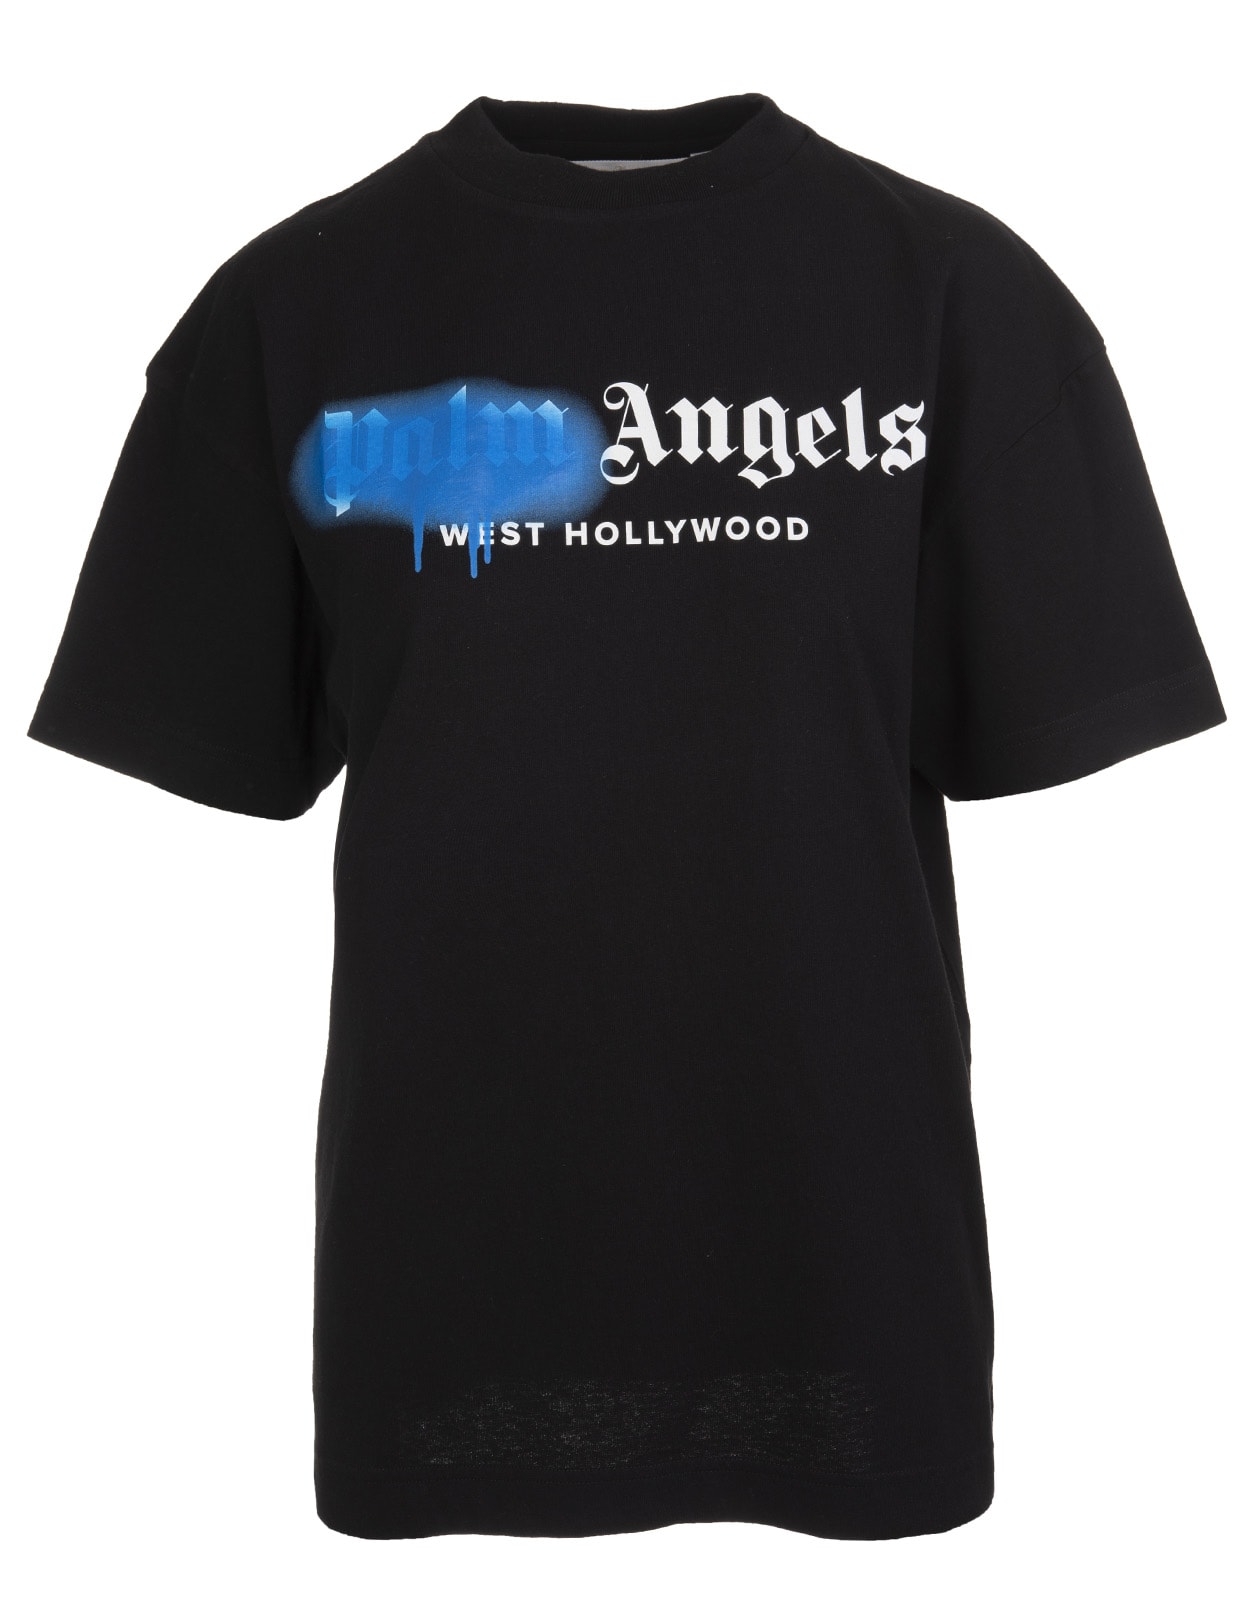 PALM ANGELS WOMAN BLACK AND BLUE WEST HOLLYWOOD LOGO SPRAY T-SHIRT,11944078